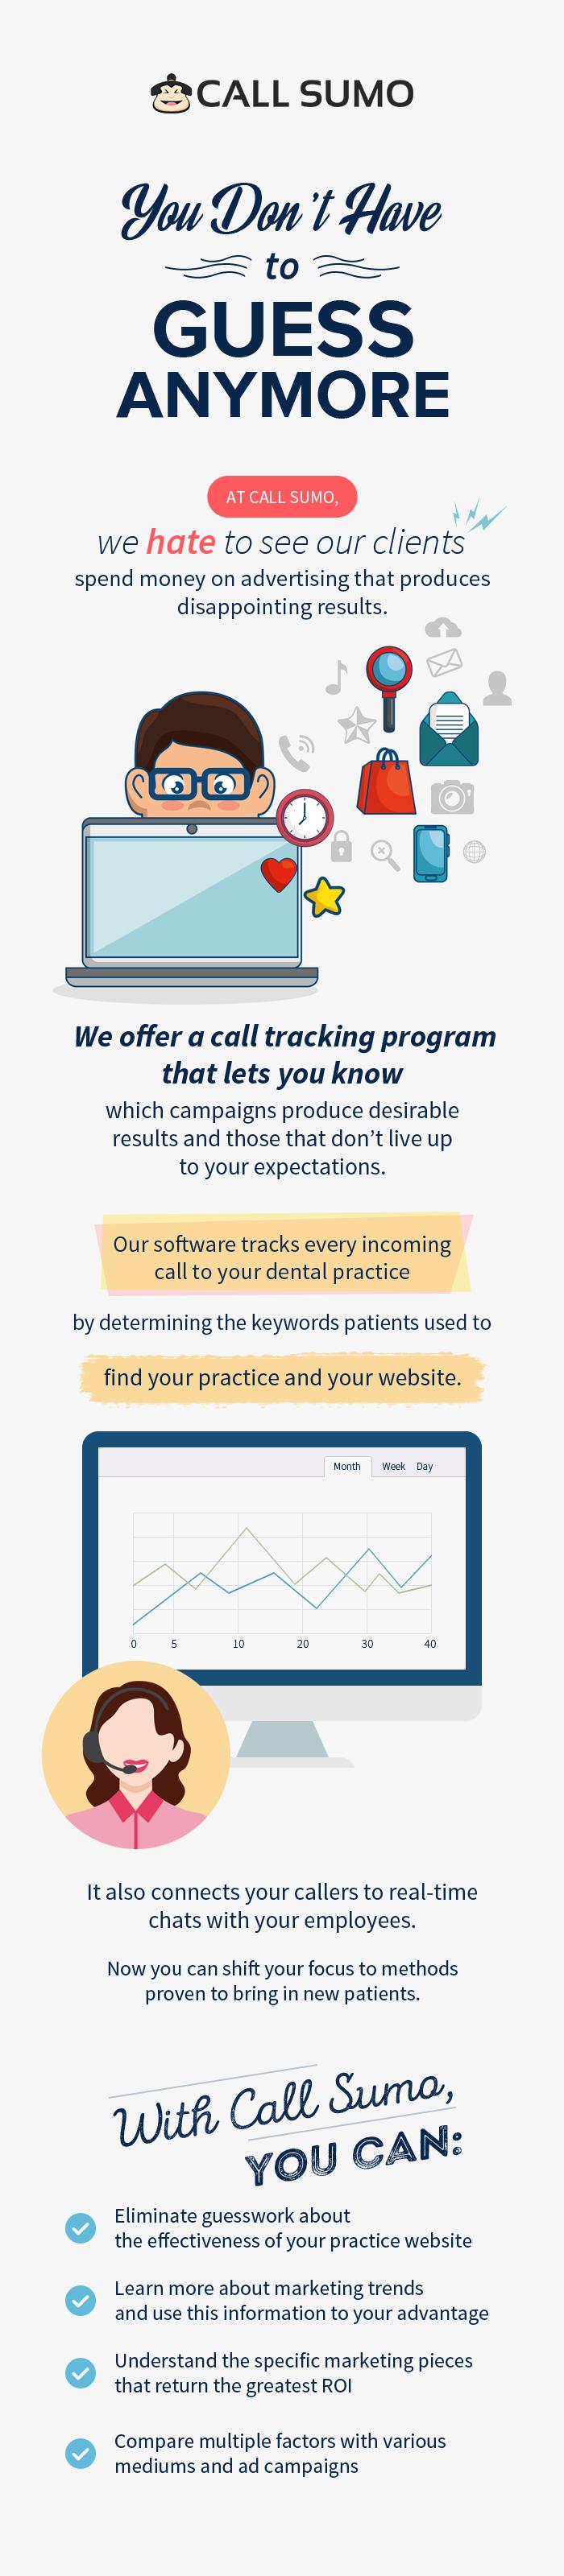 Call Sumo - A Reliable Call Tracking Software for Dentists